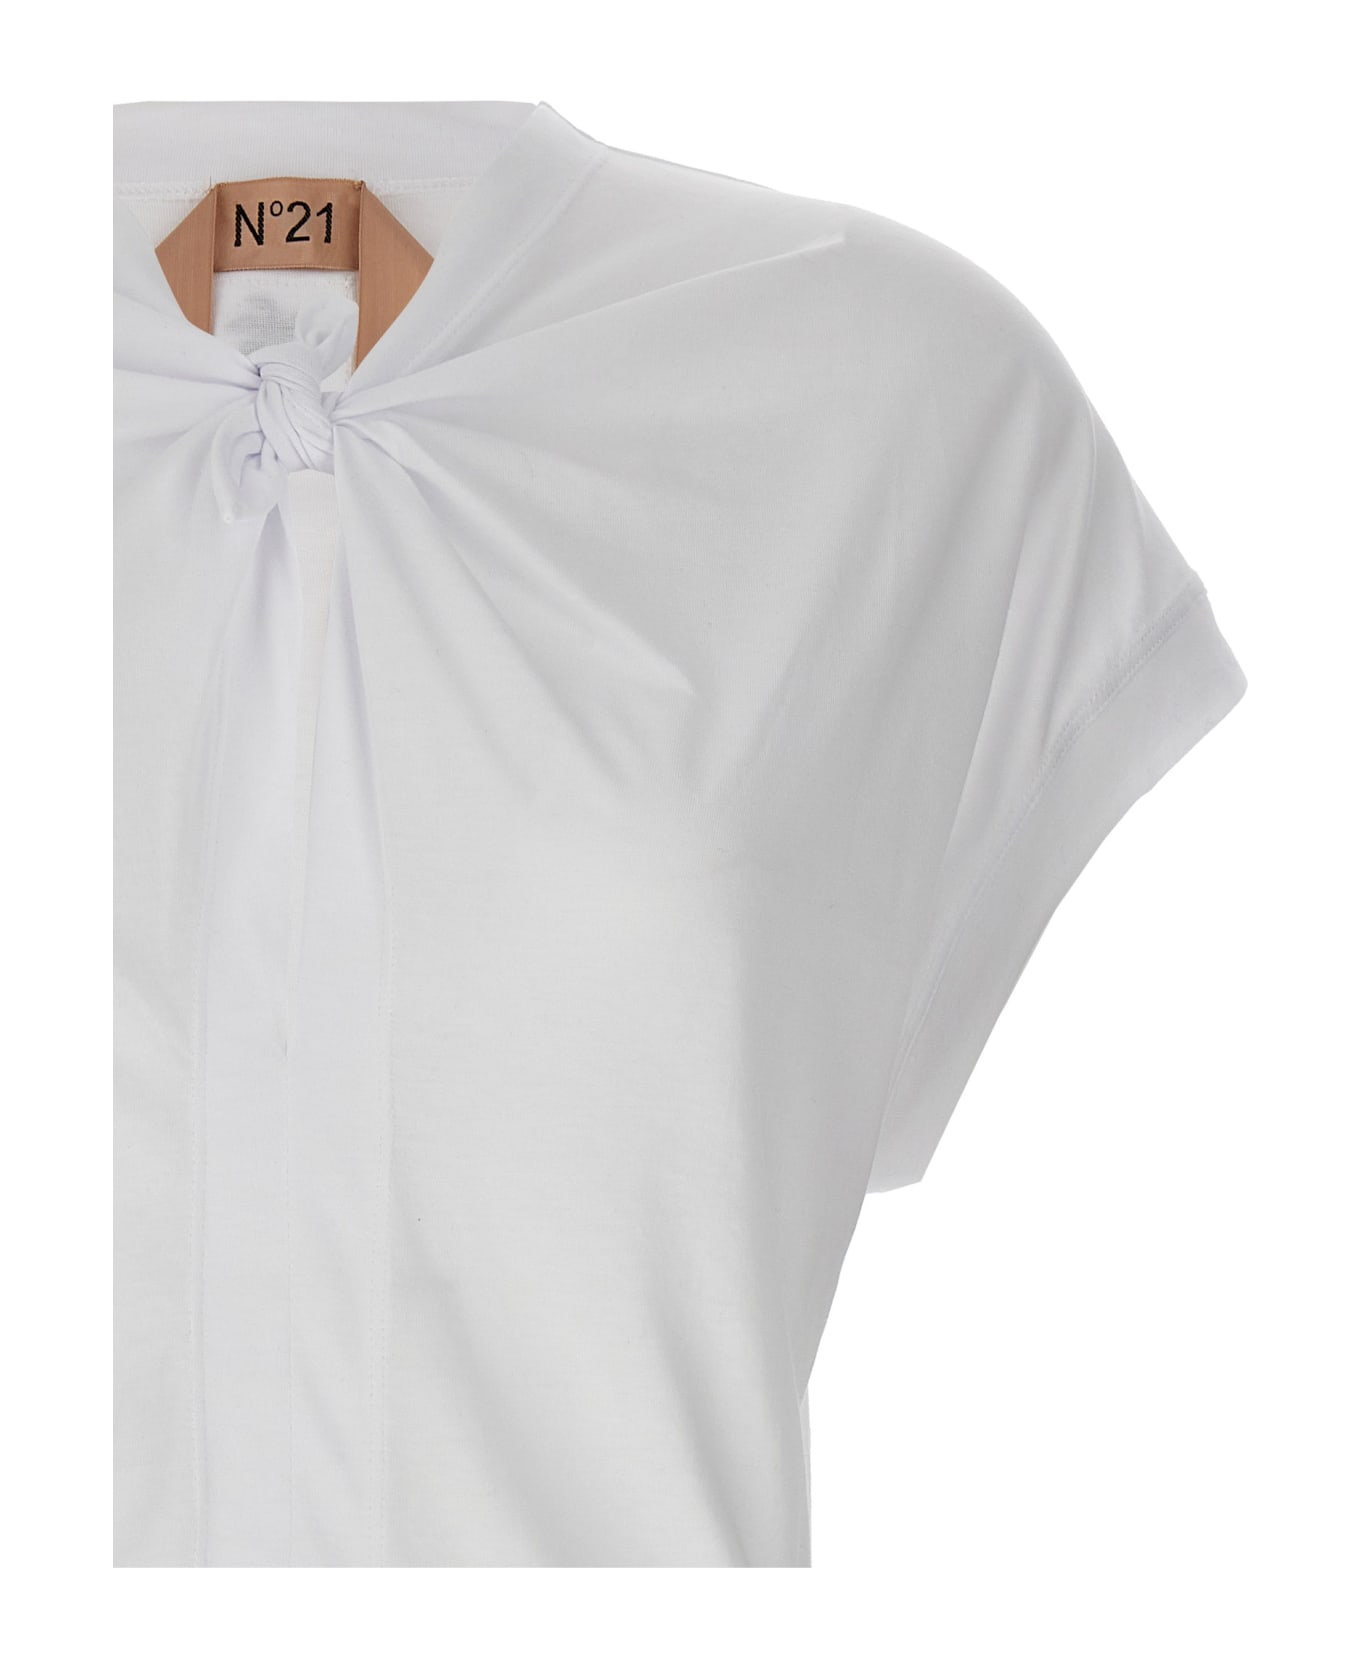 N.21 Knot Detail T-shirt - White ブラウス